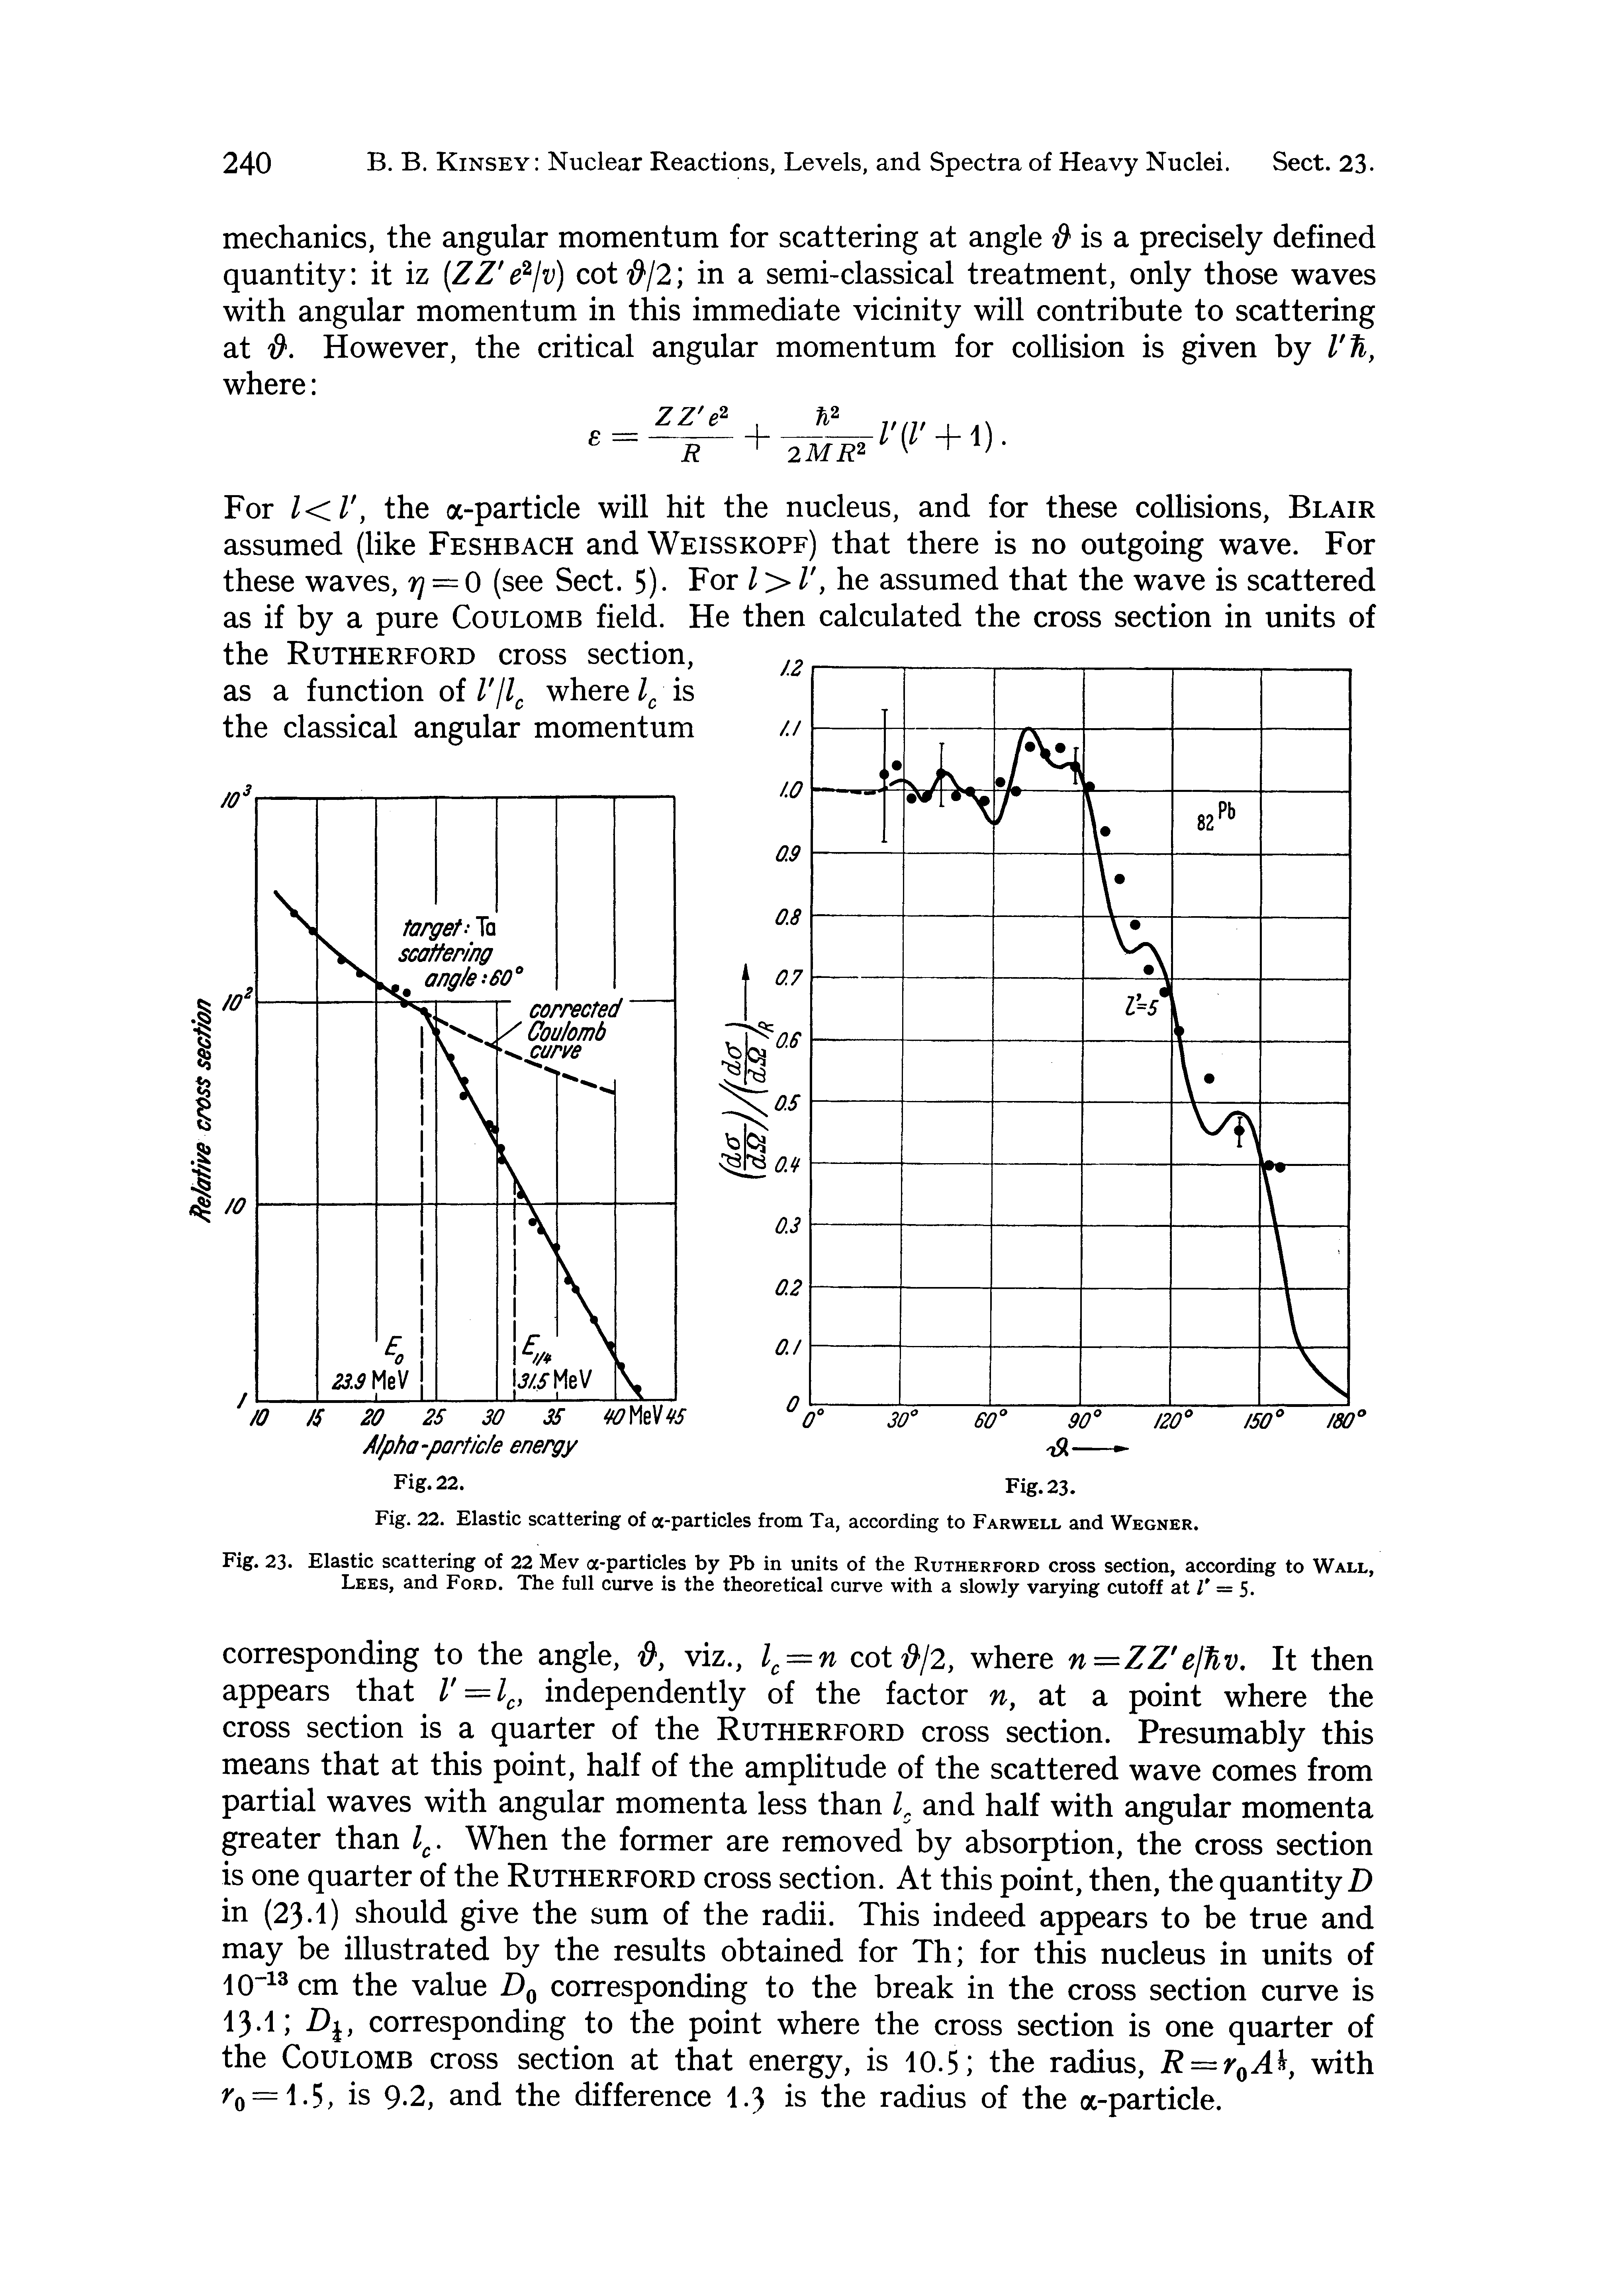 Fig. 22. Elastic scattering of a-particles from Ta, according to Farwell and Wegner.